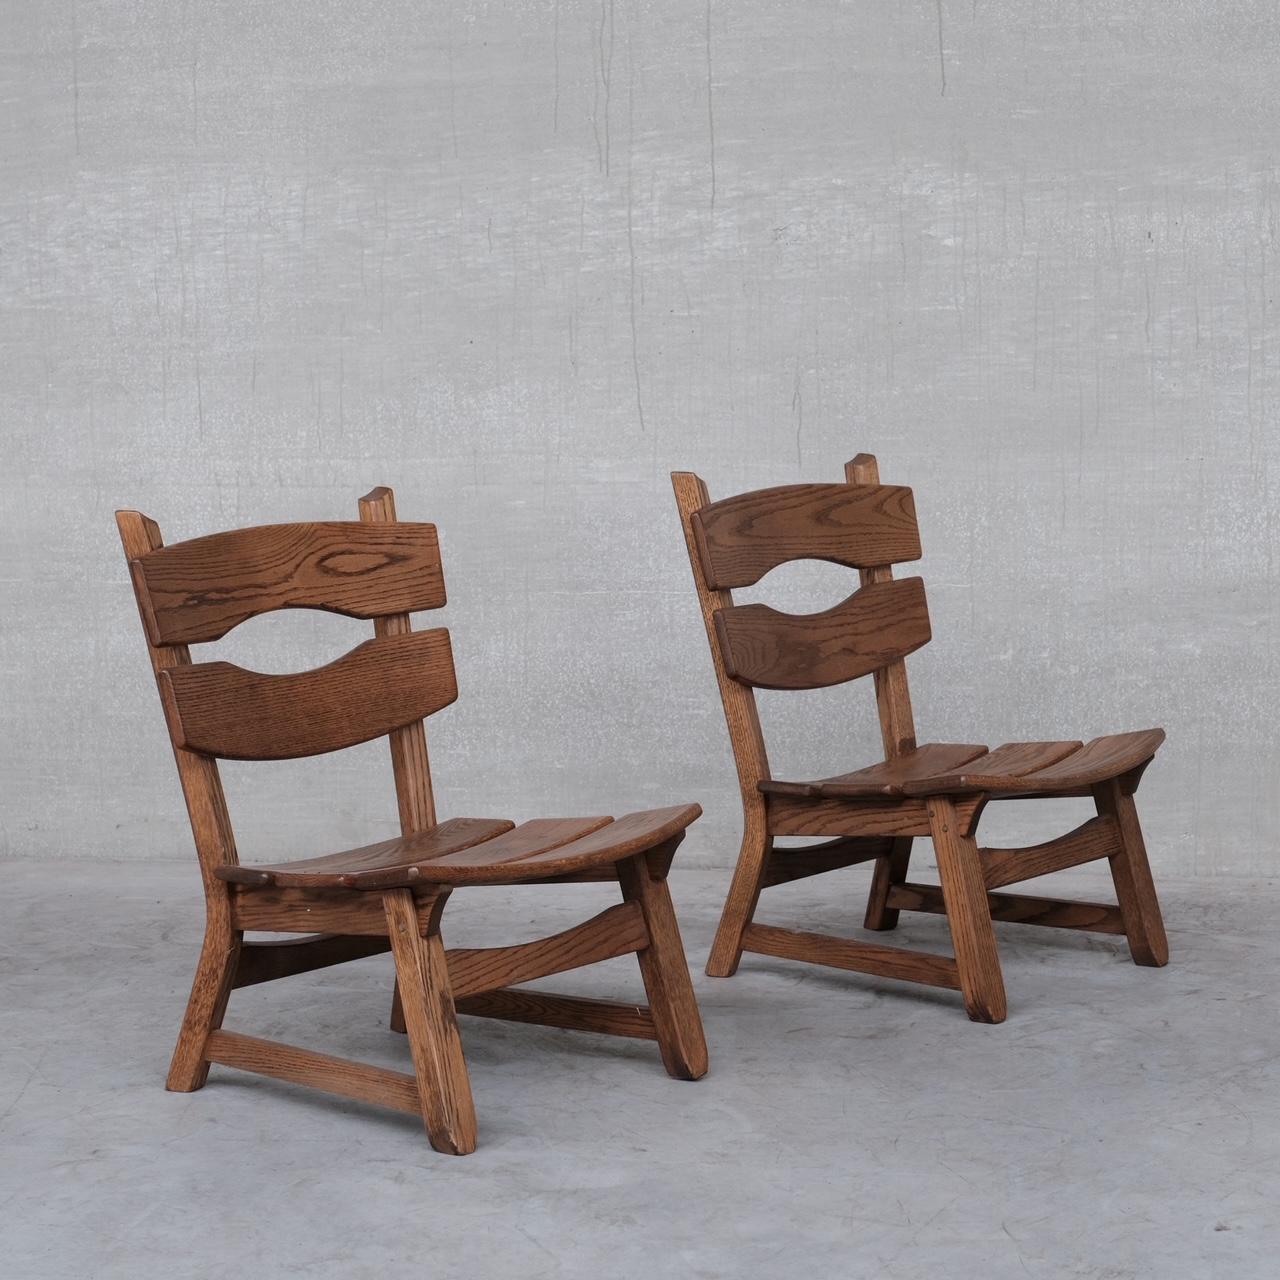 Brutalist Mid-Century Low Wooden Lounge Chairs '7' For Sale 9